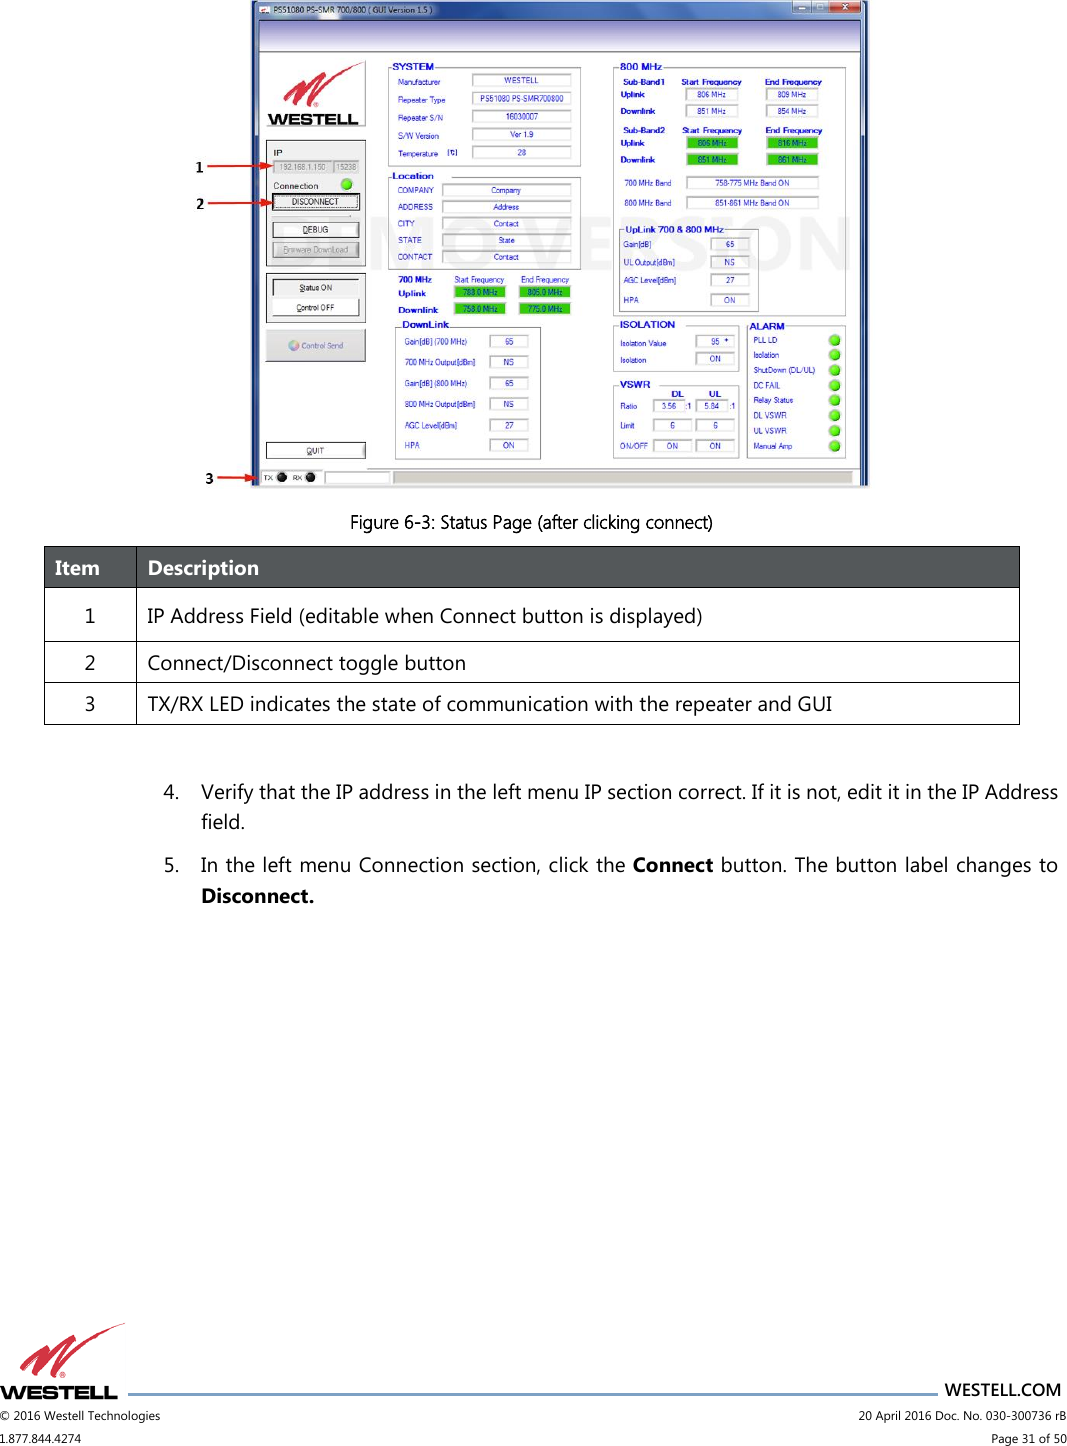                      WESTELL.COM © 2016 Westell Technologies                             20 April 2016 Doc. No. 030-300736 rB 1.877.844.4274                             Page 31 of 50   Figure 6-3: Status Page (after clicking connect) Item Description 1 IP Address Field (editable when Connect button is displayed) 2 Connect/Disconnect toggle button 3 TX/RX LED indicates the state of communication with the repeater and GUI  4. Verify that the IP address in the left menu IP section correct. If it is not, edit it in the IP Address field. 5. In the left menu Connection section, click the Connect button. The button label changes to Disconnect.   